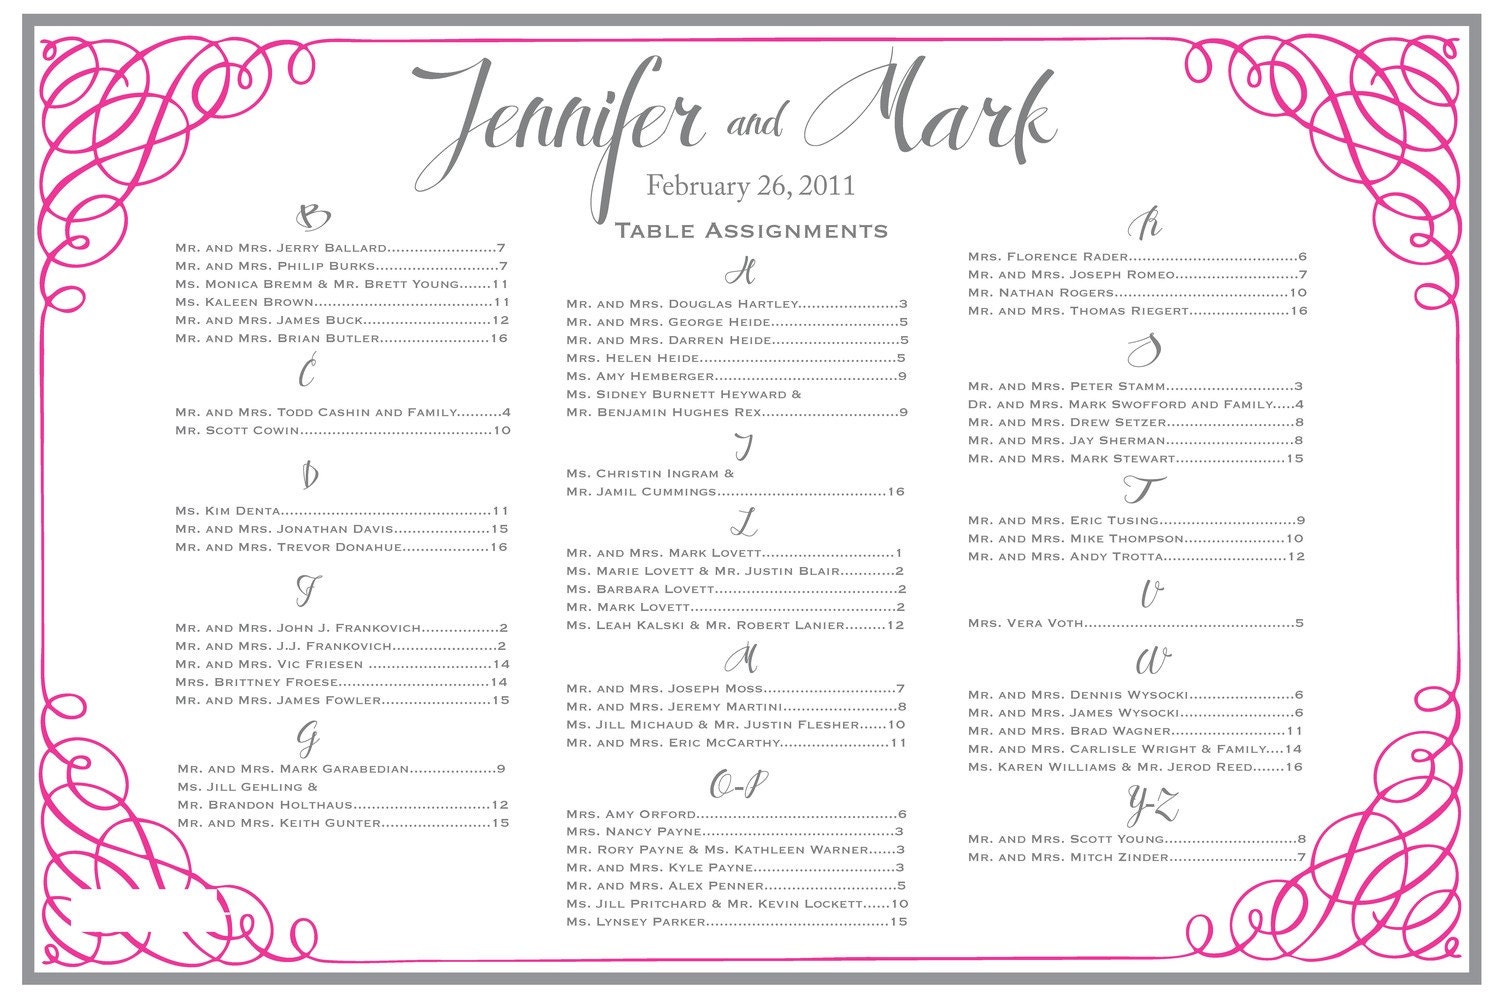 Wedding Seating Chart From conncall